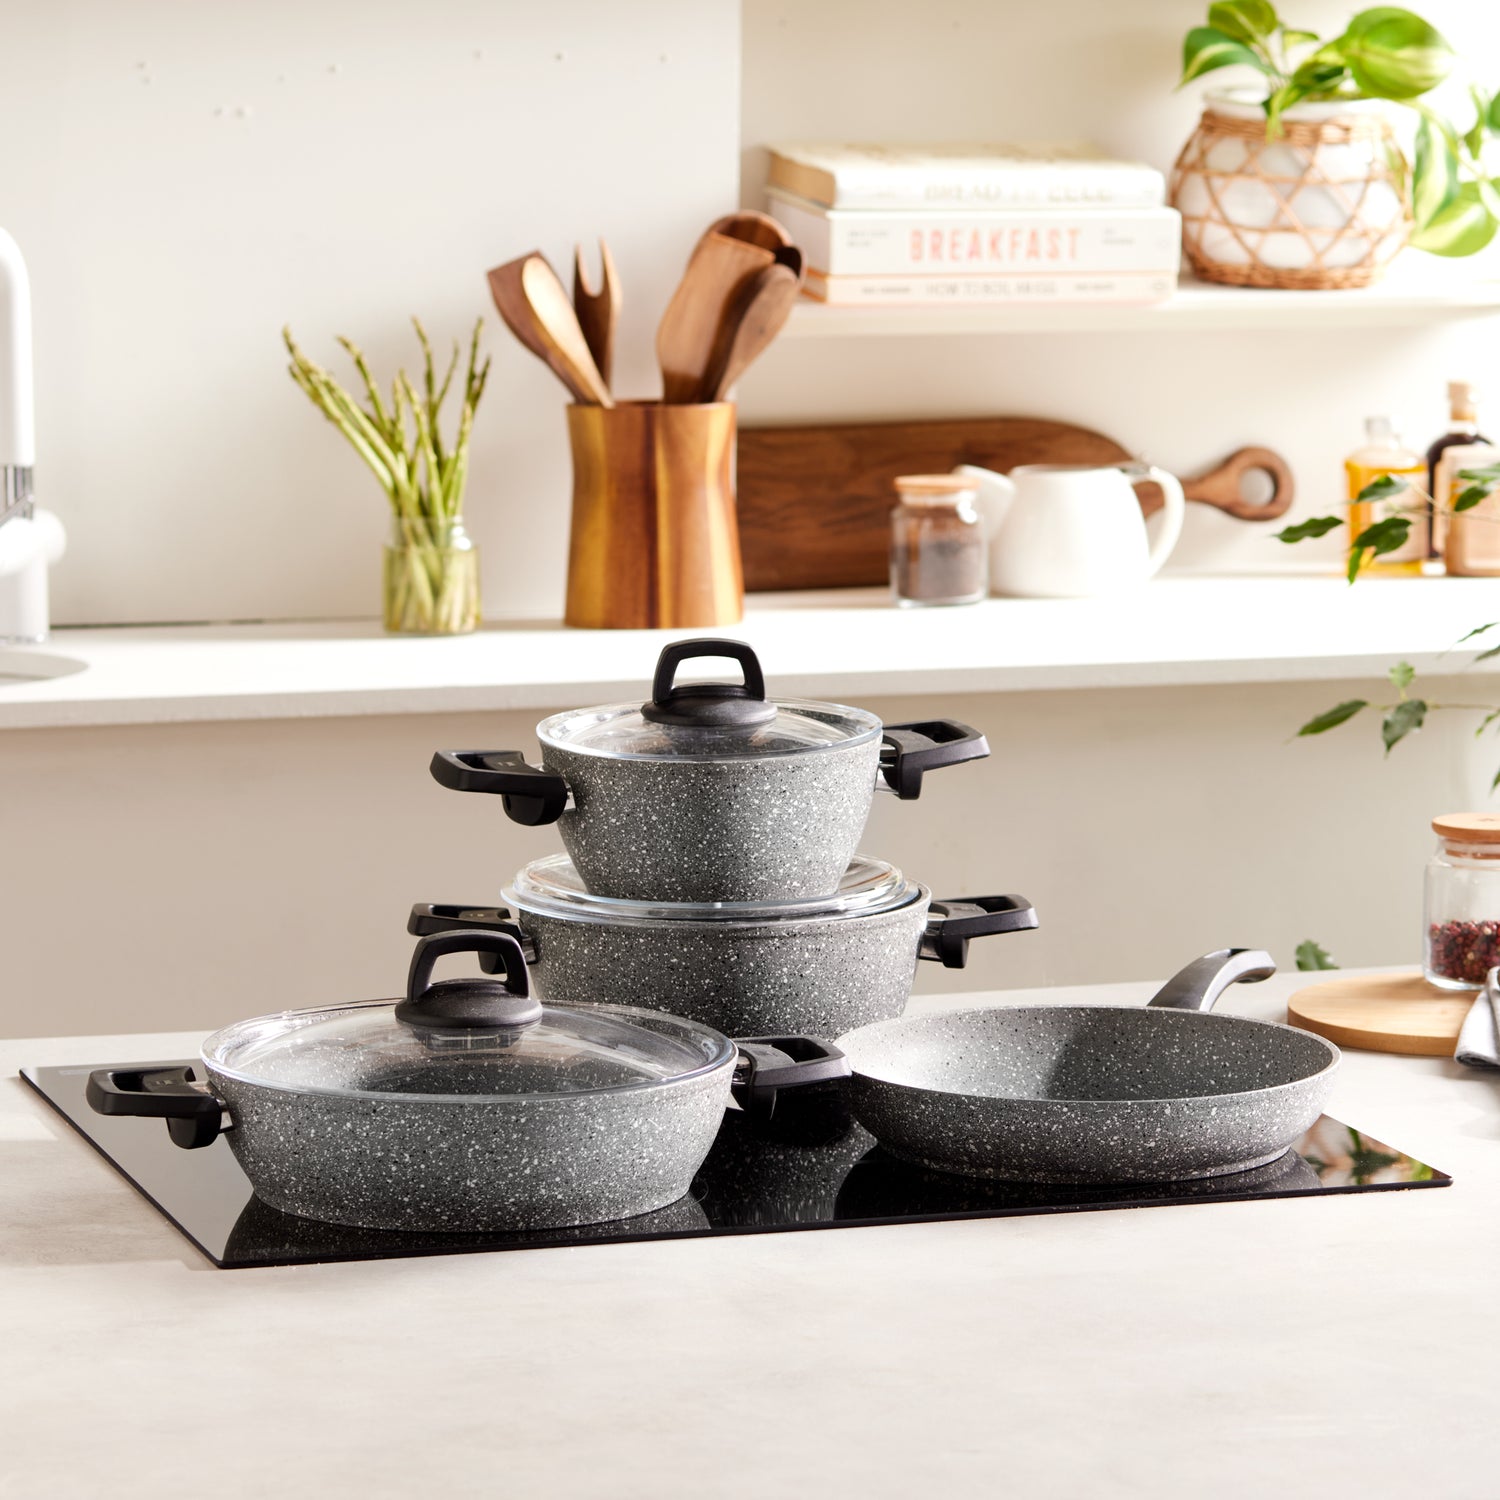 Favorite Kitchenware Products